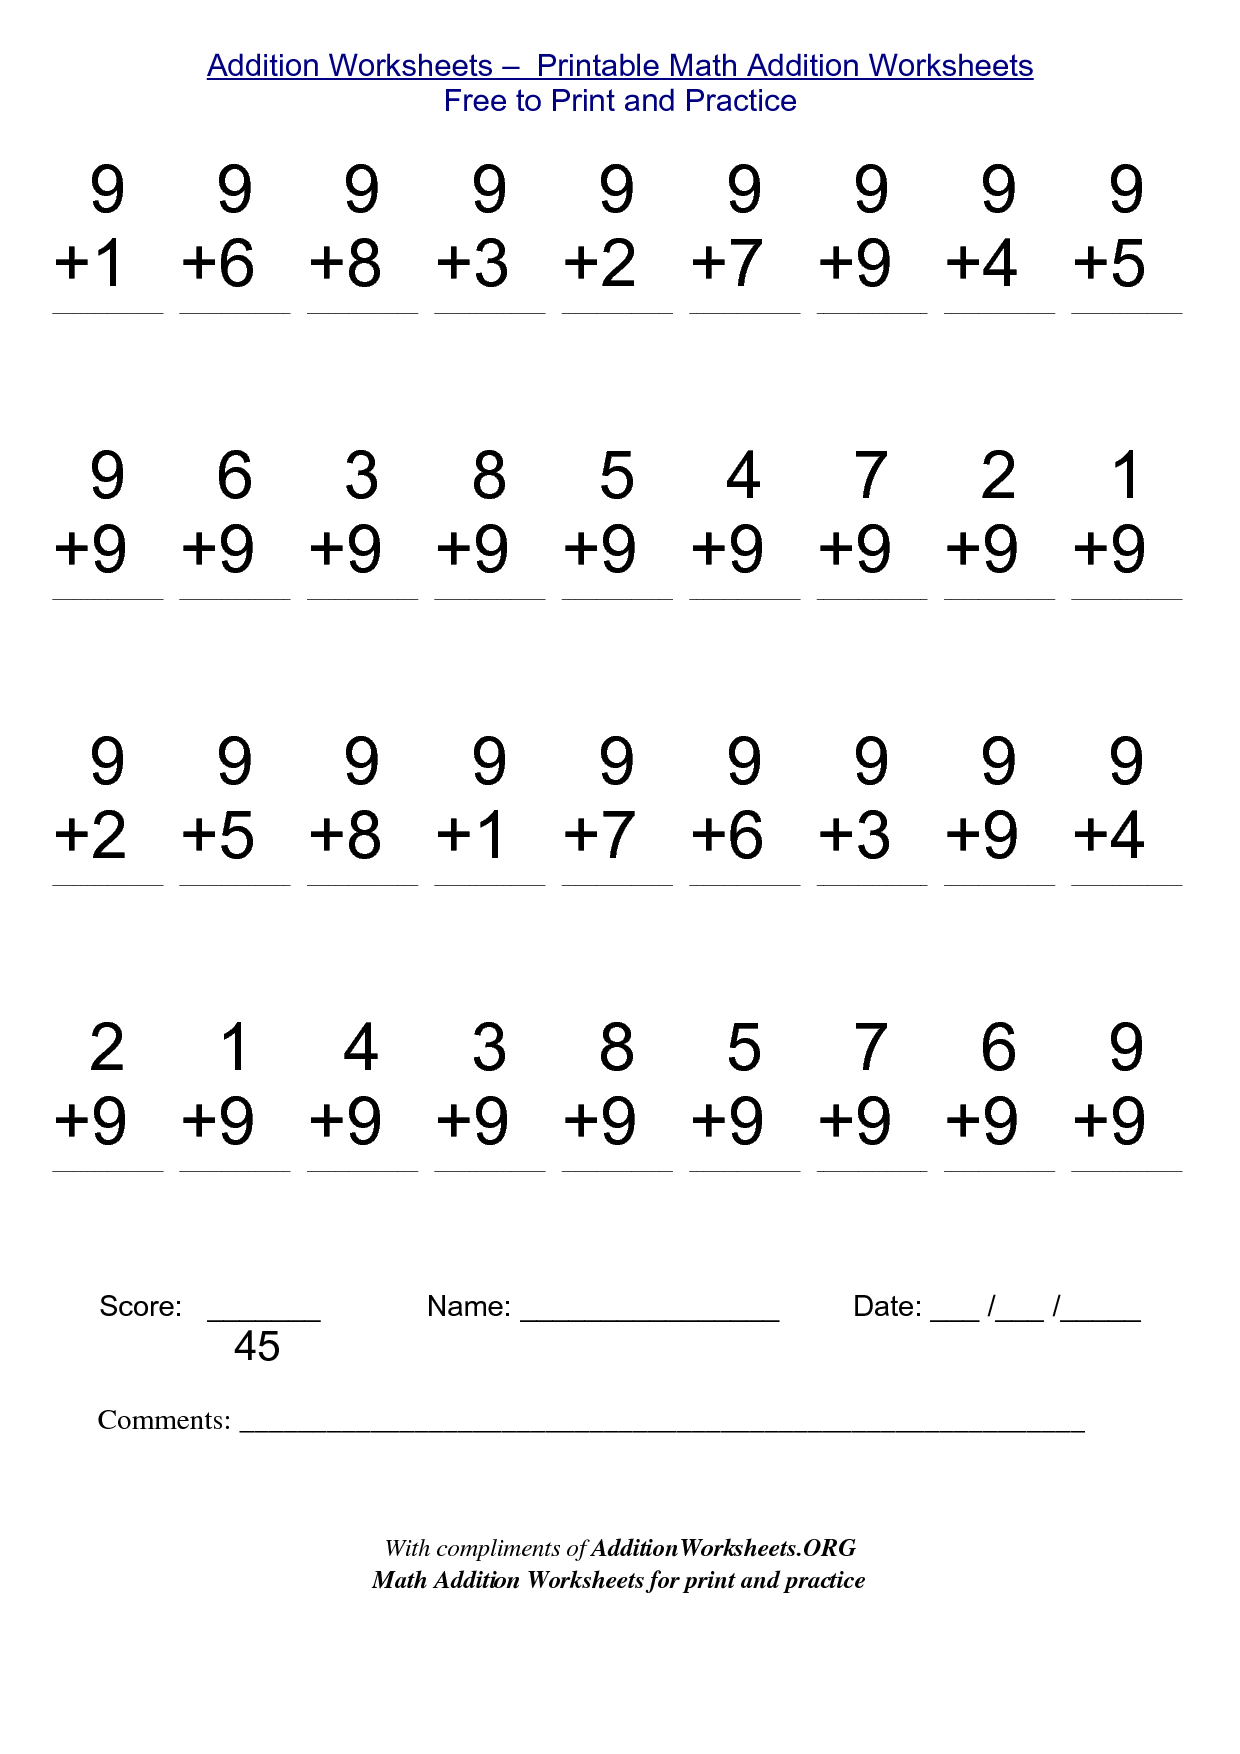 Math Worksheets For Free To Print - Alot | Me | Math Worksheets - Free Printable Worksheets For 2Nd Grade